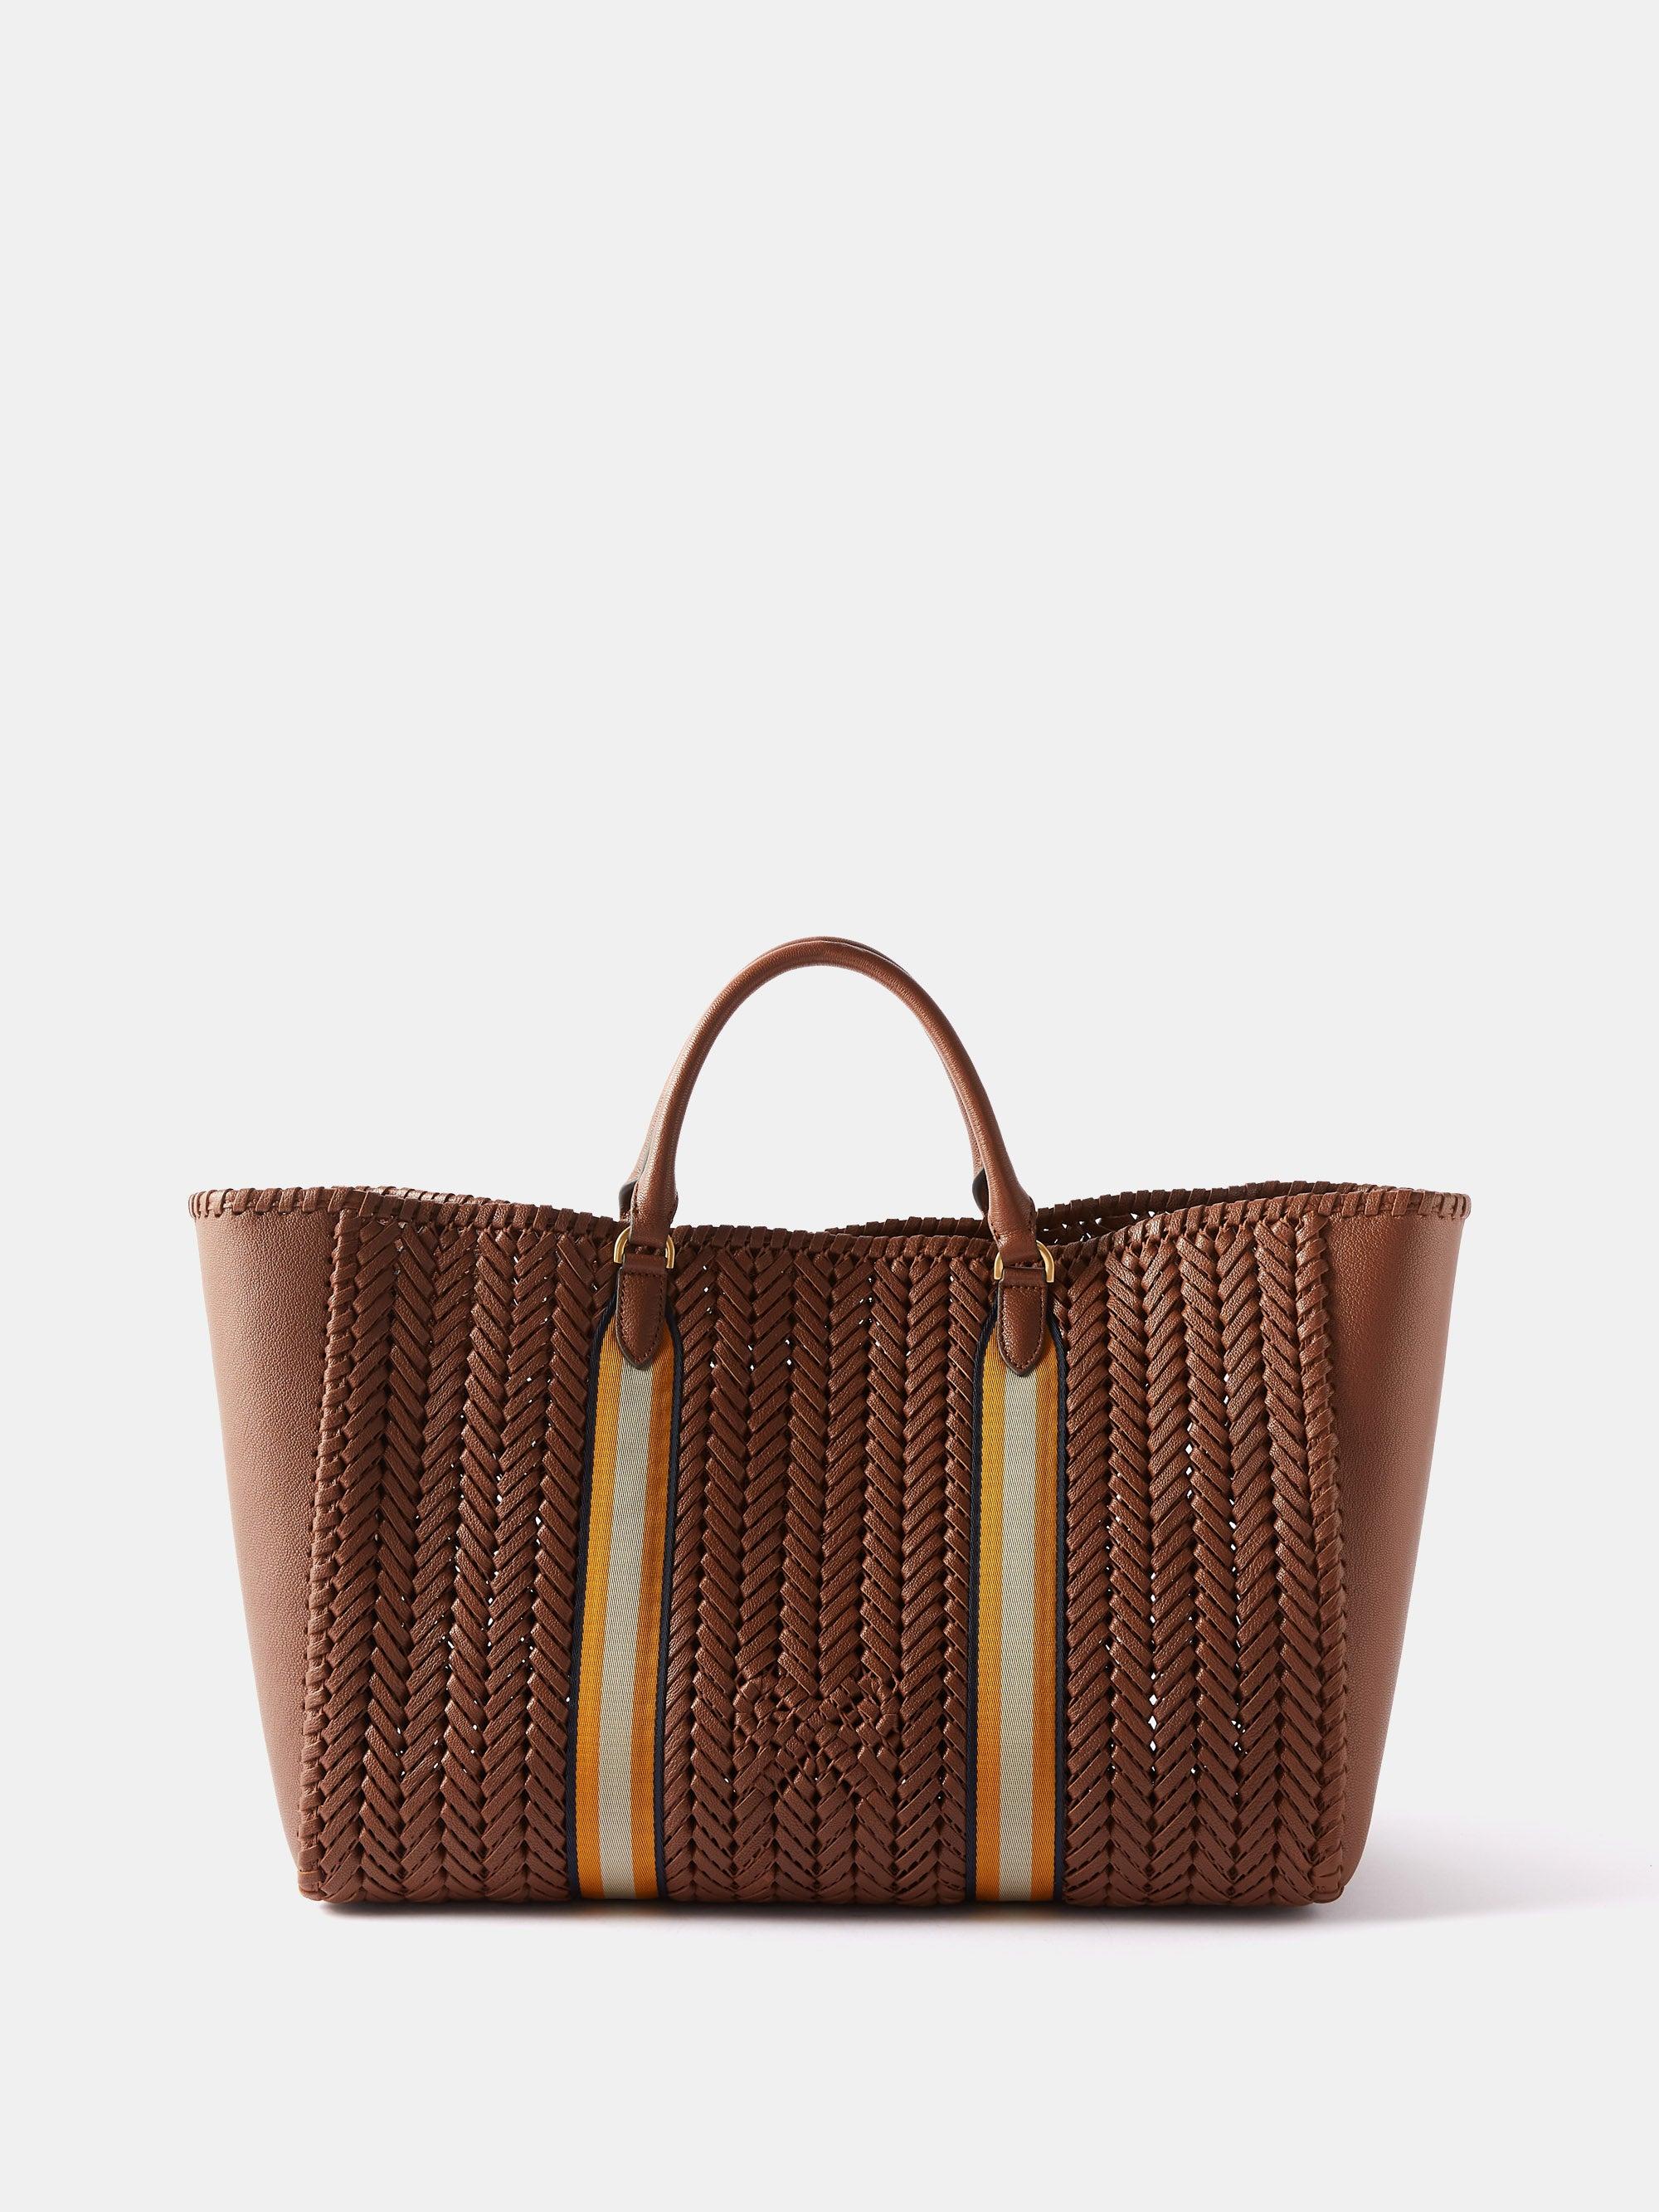 Anya Hindmarch Neeson Nastro Braided-leather Tote Bag in Brown | Lyst